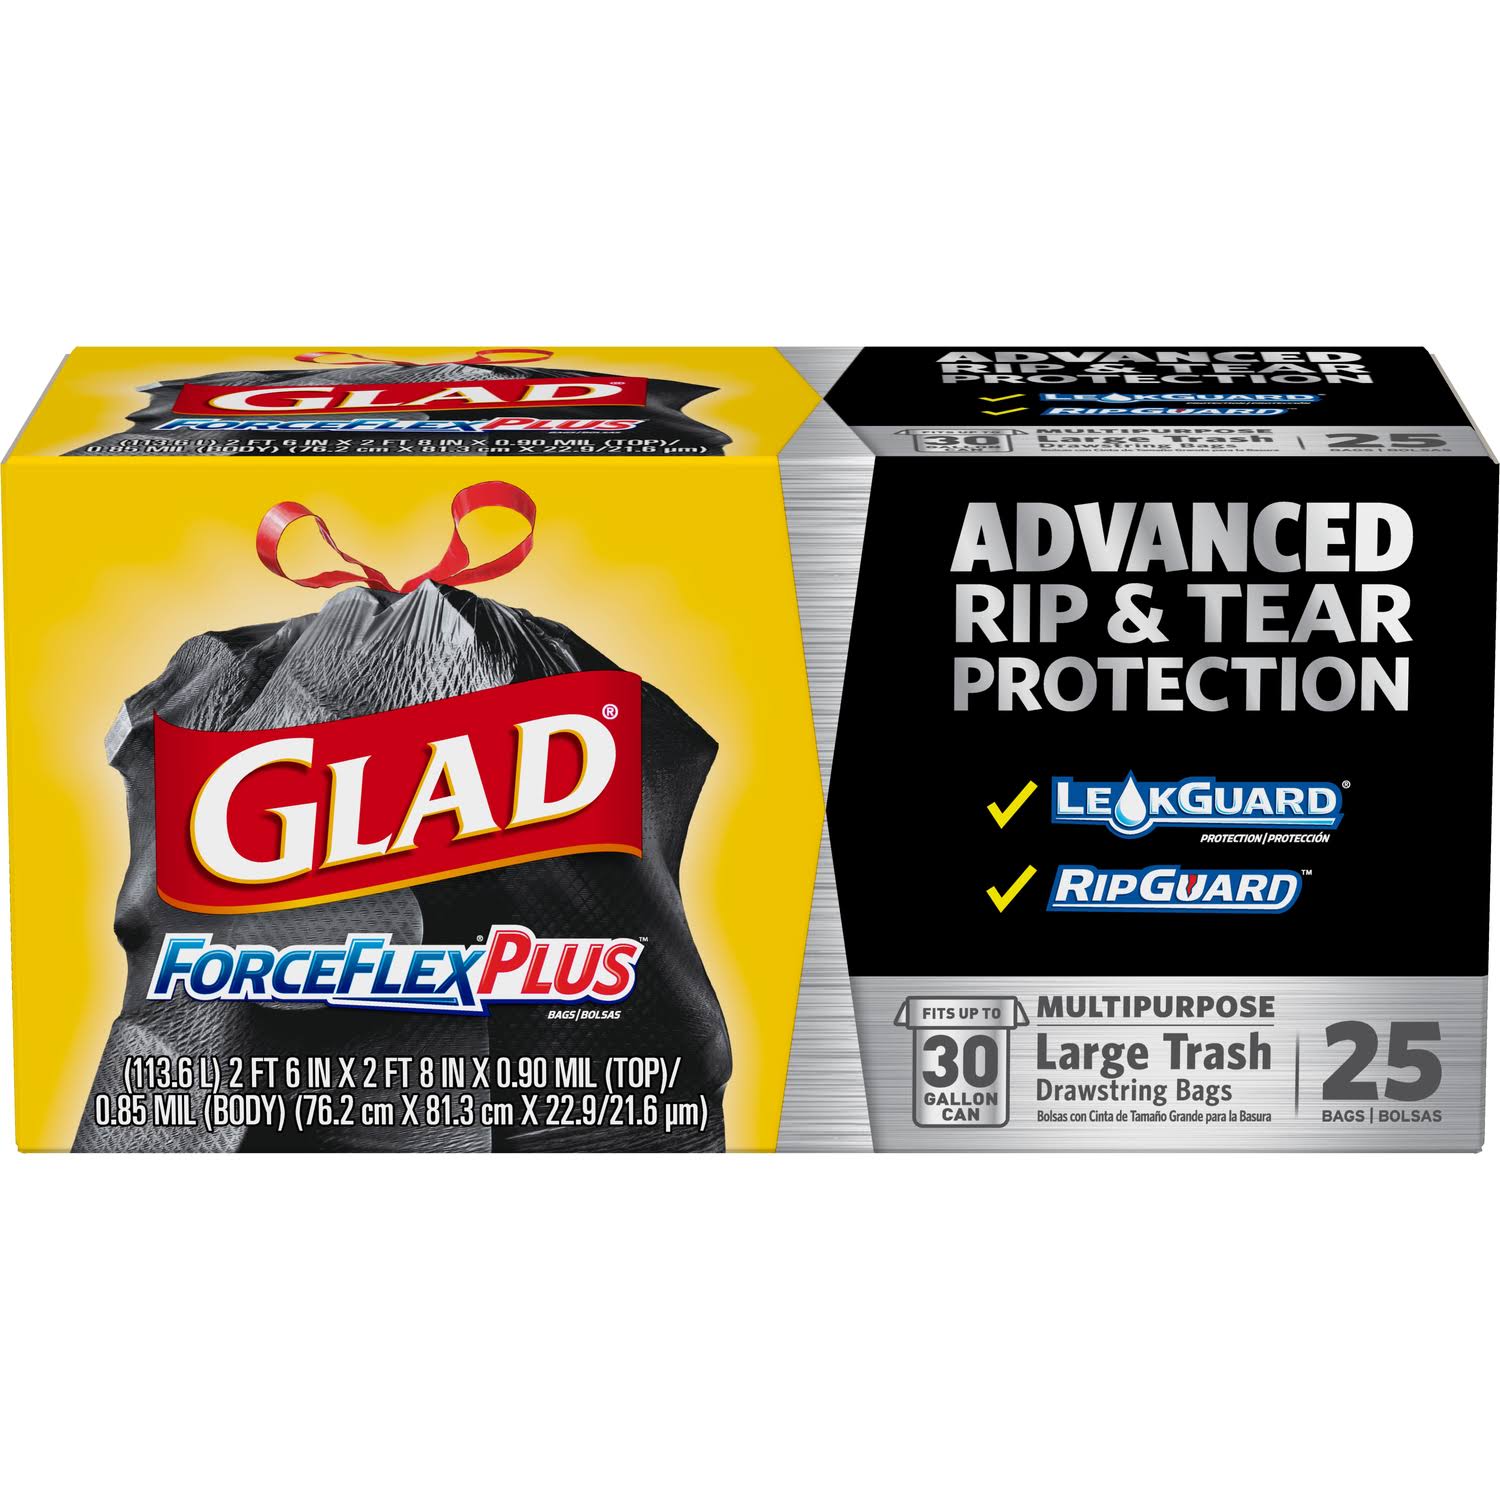 Glad ForceFlex Extra Strong Drawstring Trash Bags - 30 Gallon, Large